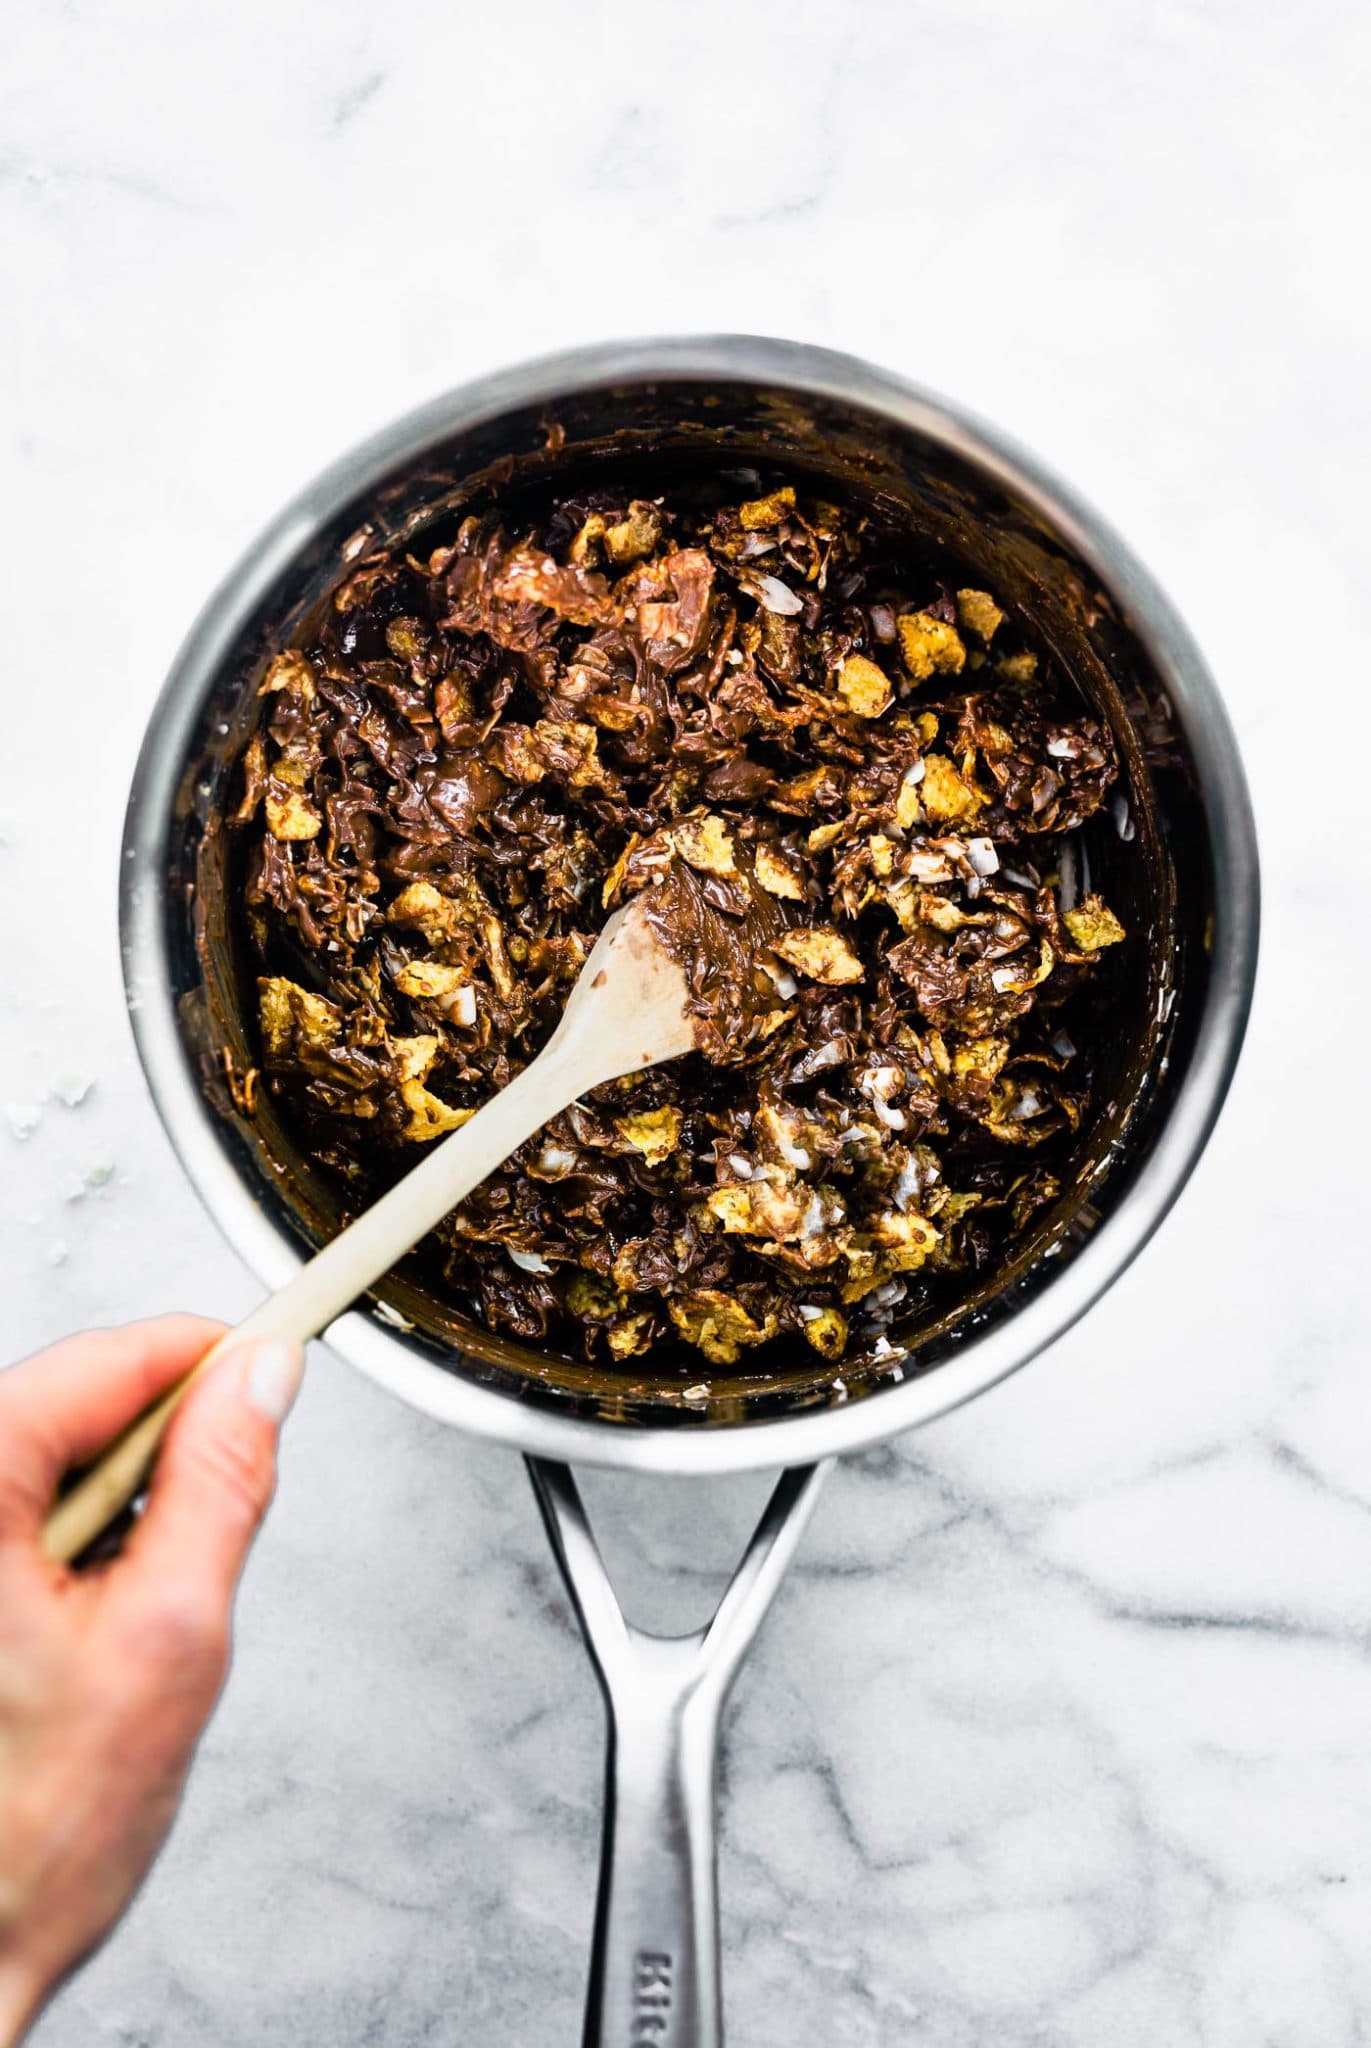 a woman's hand holding a wooden spoon in a saucepan folding cornflake cereal into a chocolate peanut butter mixture to make chocolate peanut butter cornflake cookies